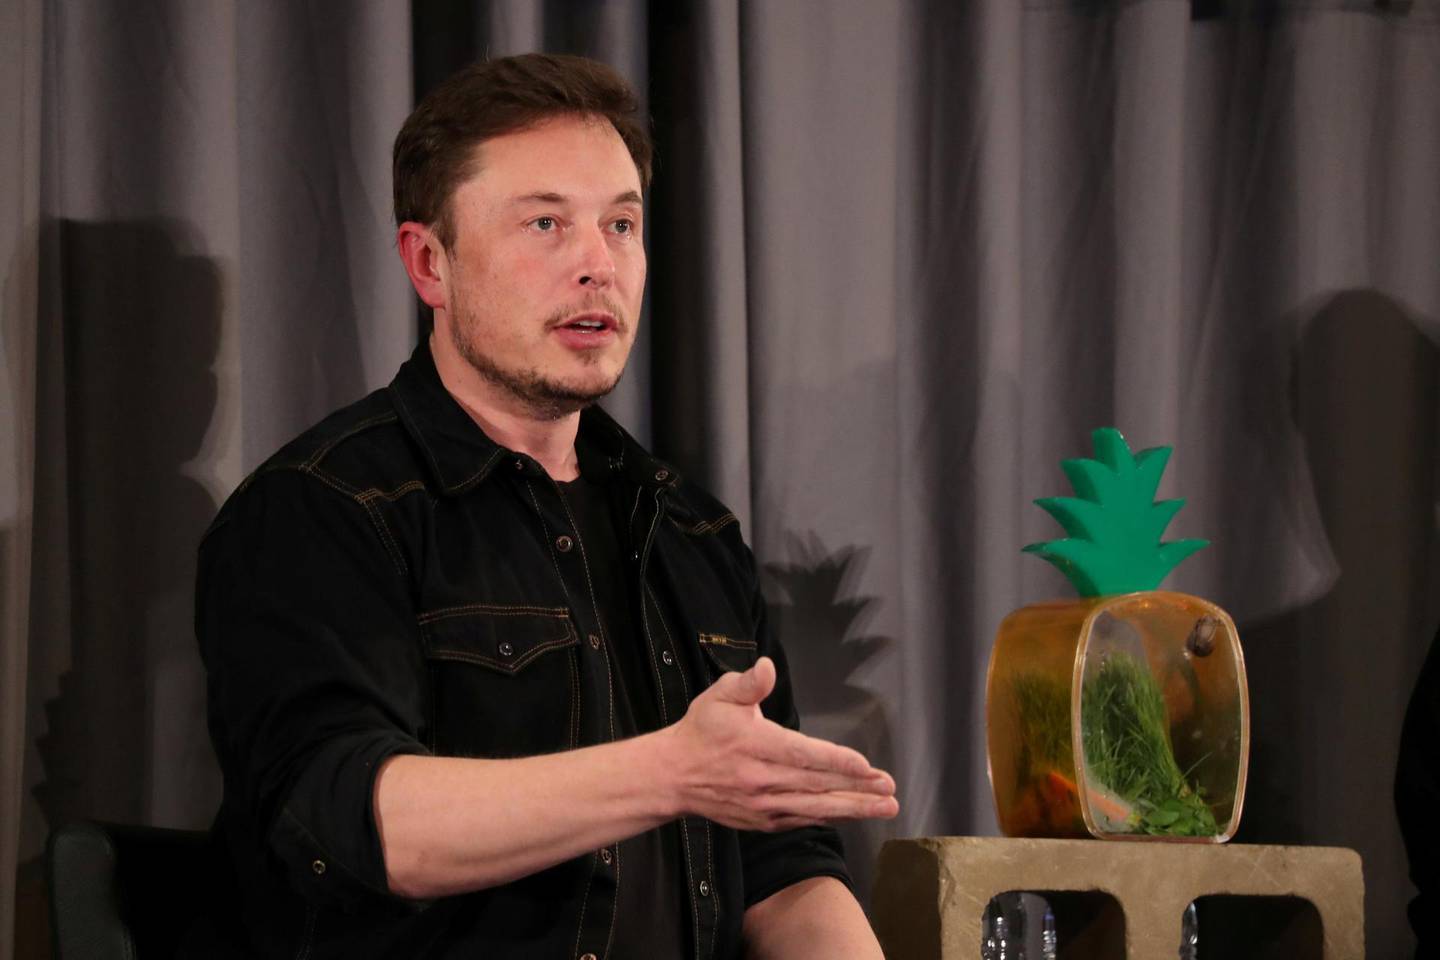 FILE PHOTO: Elon Musk speaks at a Boring Company community meeting in Bel Air, Los Angeles, California, U.S. May 17, 2018. REUTERS/Lucy Nicholson/File Photo